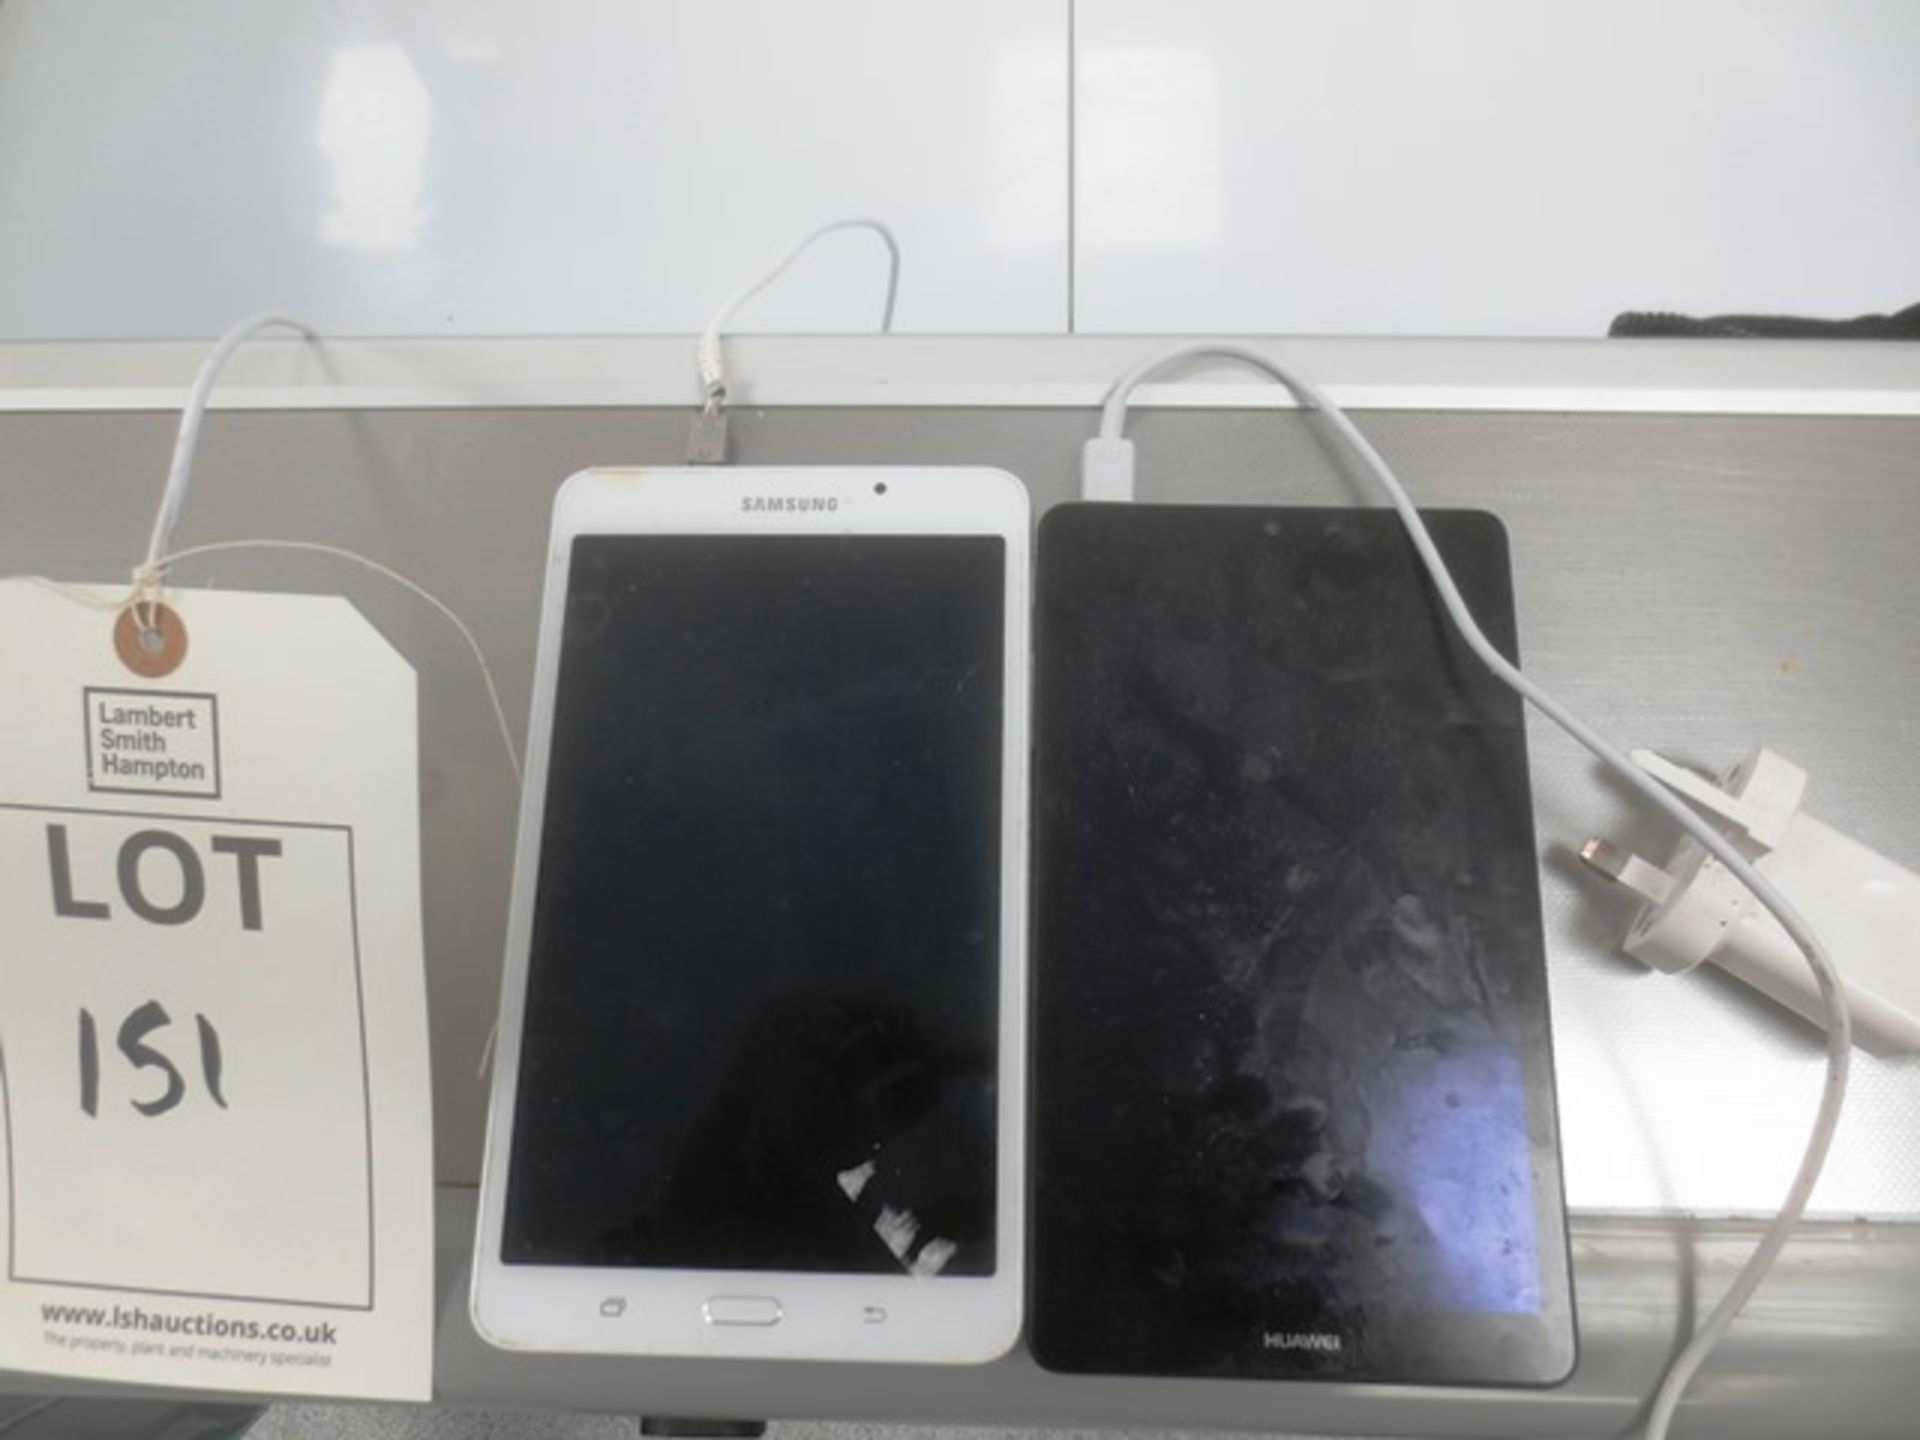 Samsung SM-T280 tablet and Huawei BG2-W09 tablet, with chargers